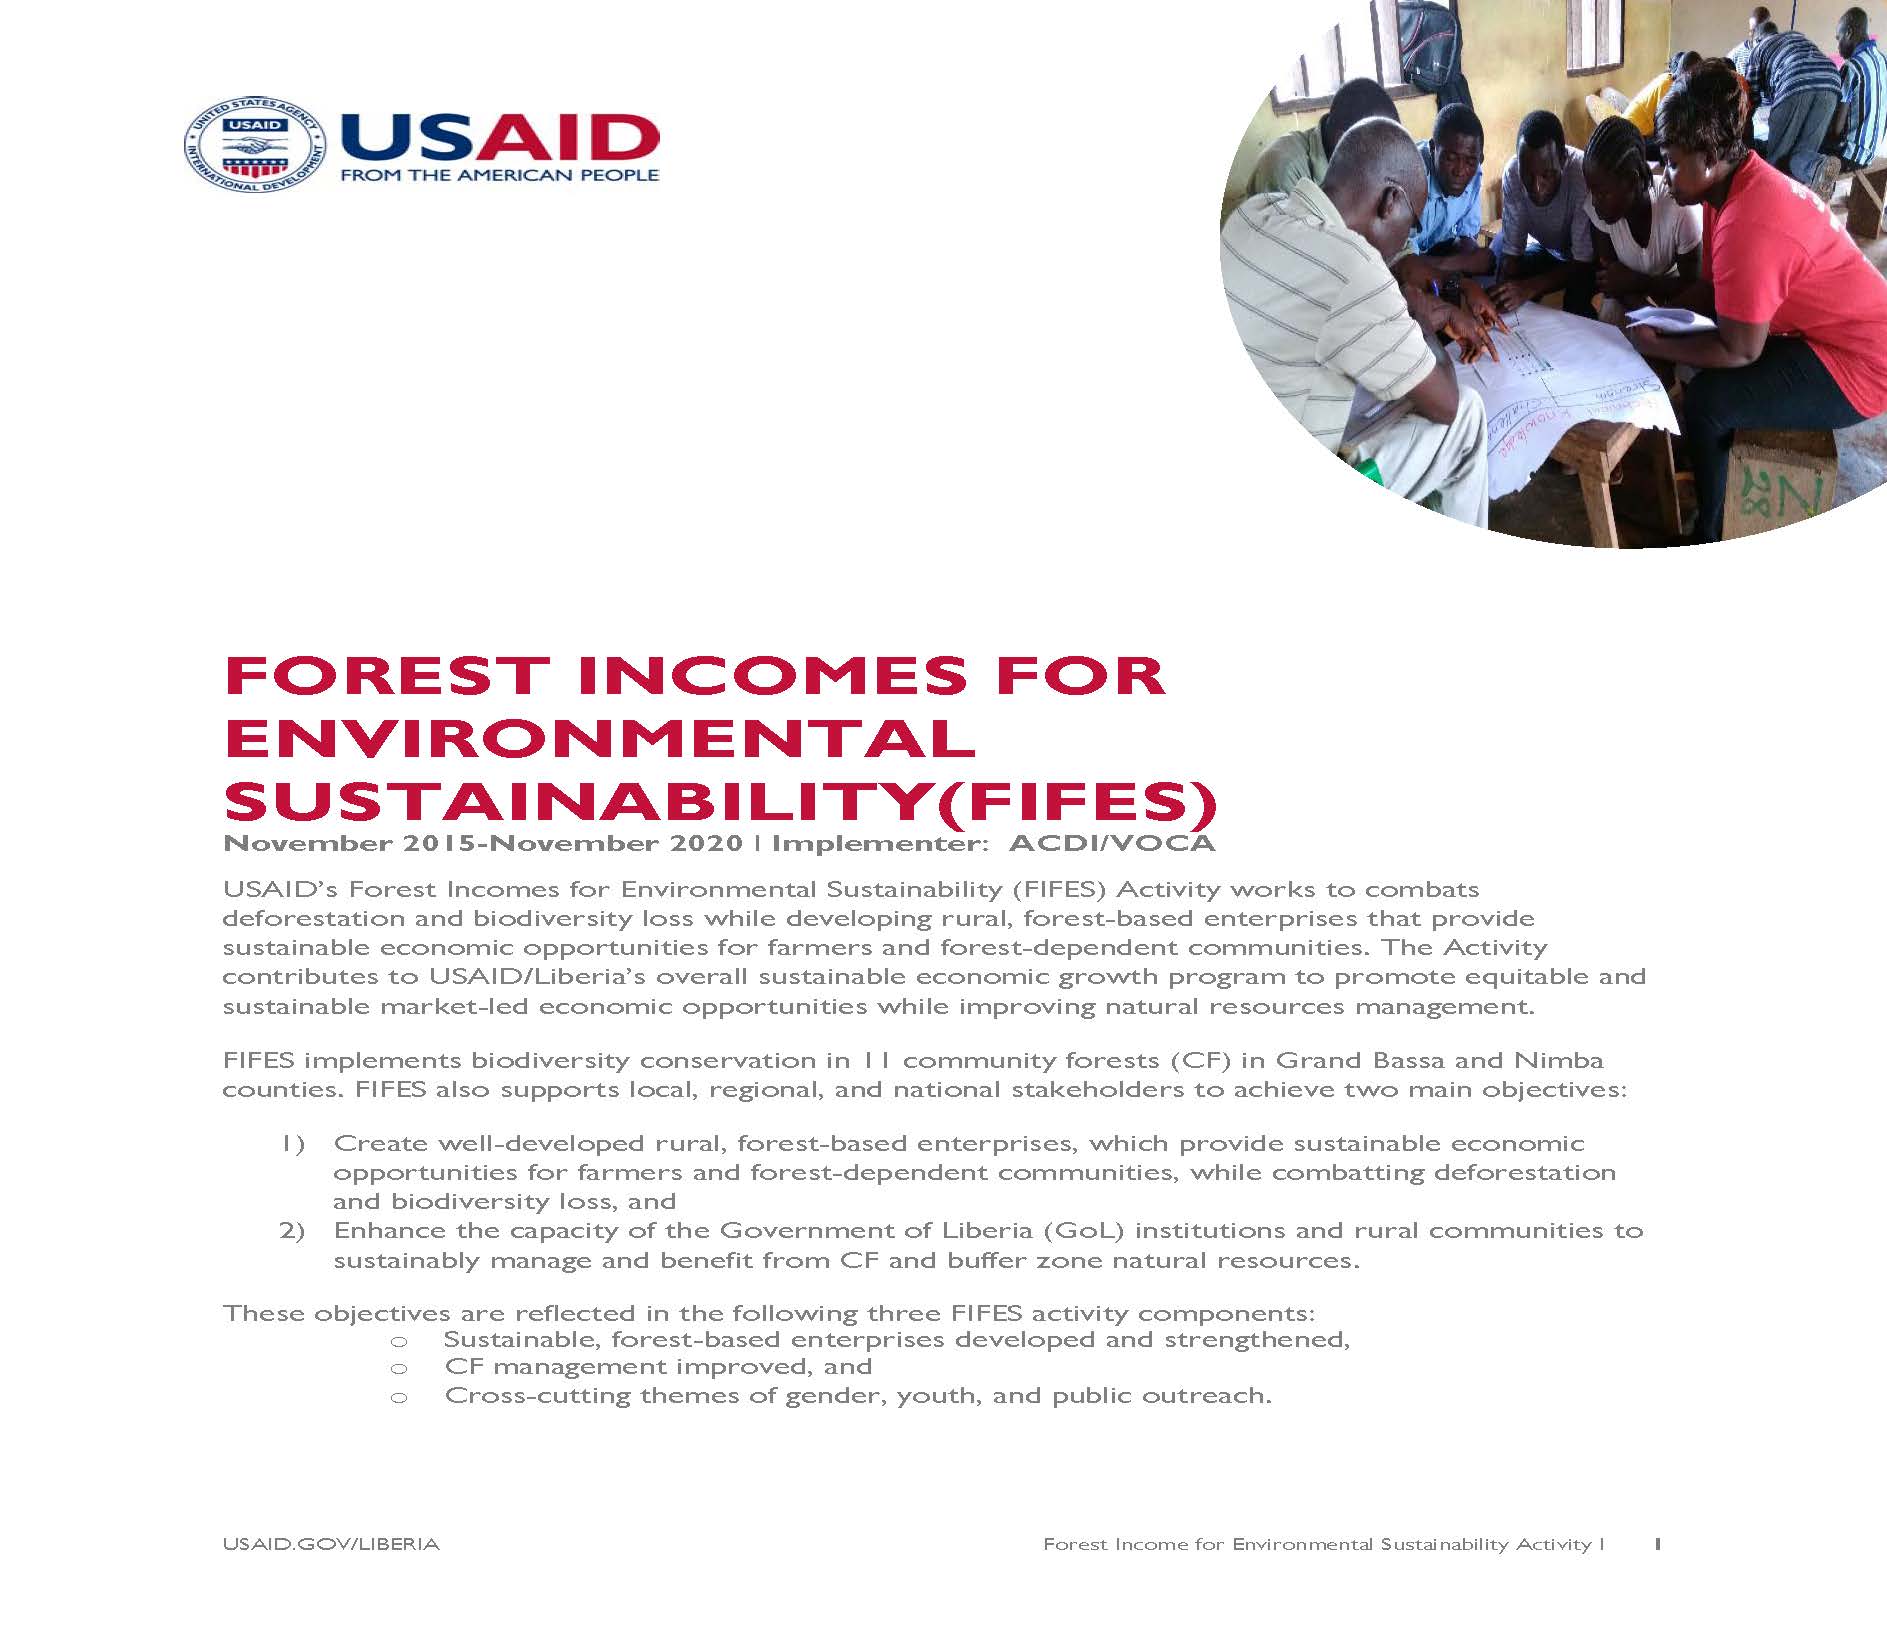  Forest Incomes for Environmental Sustainability Activity